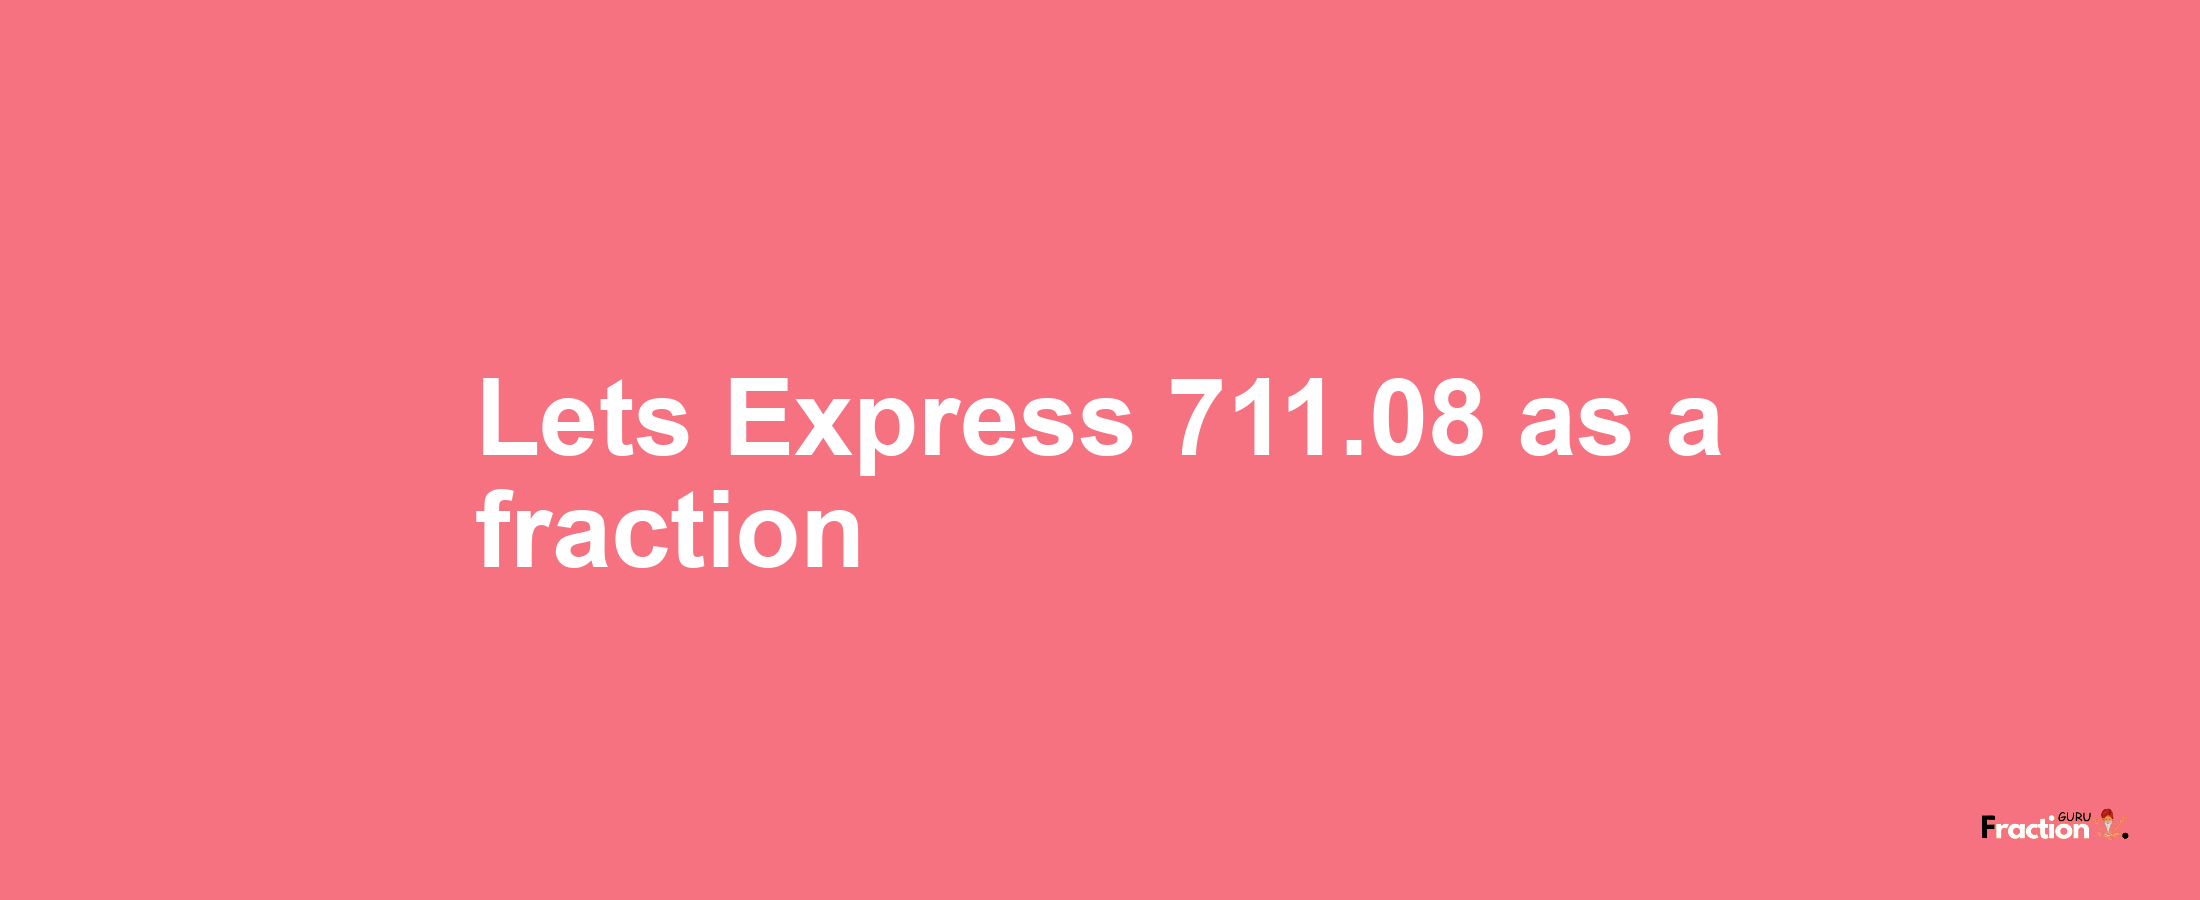 Lets Express 711.08 as afraction